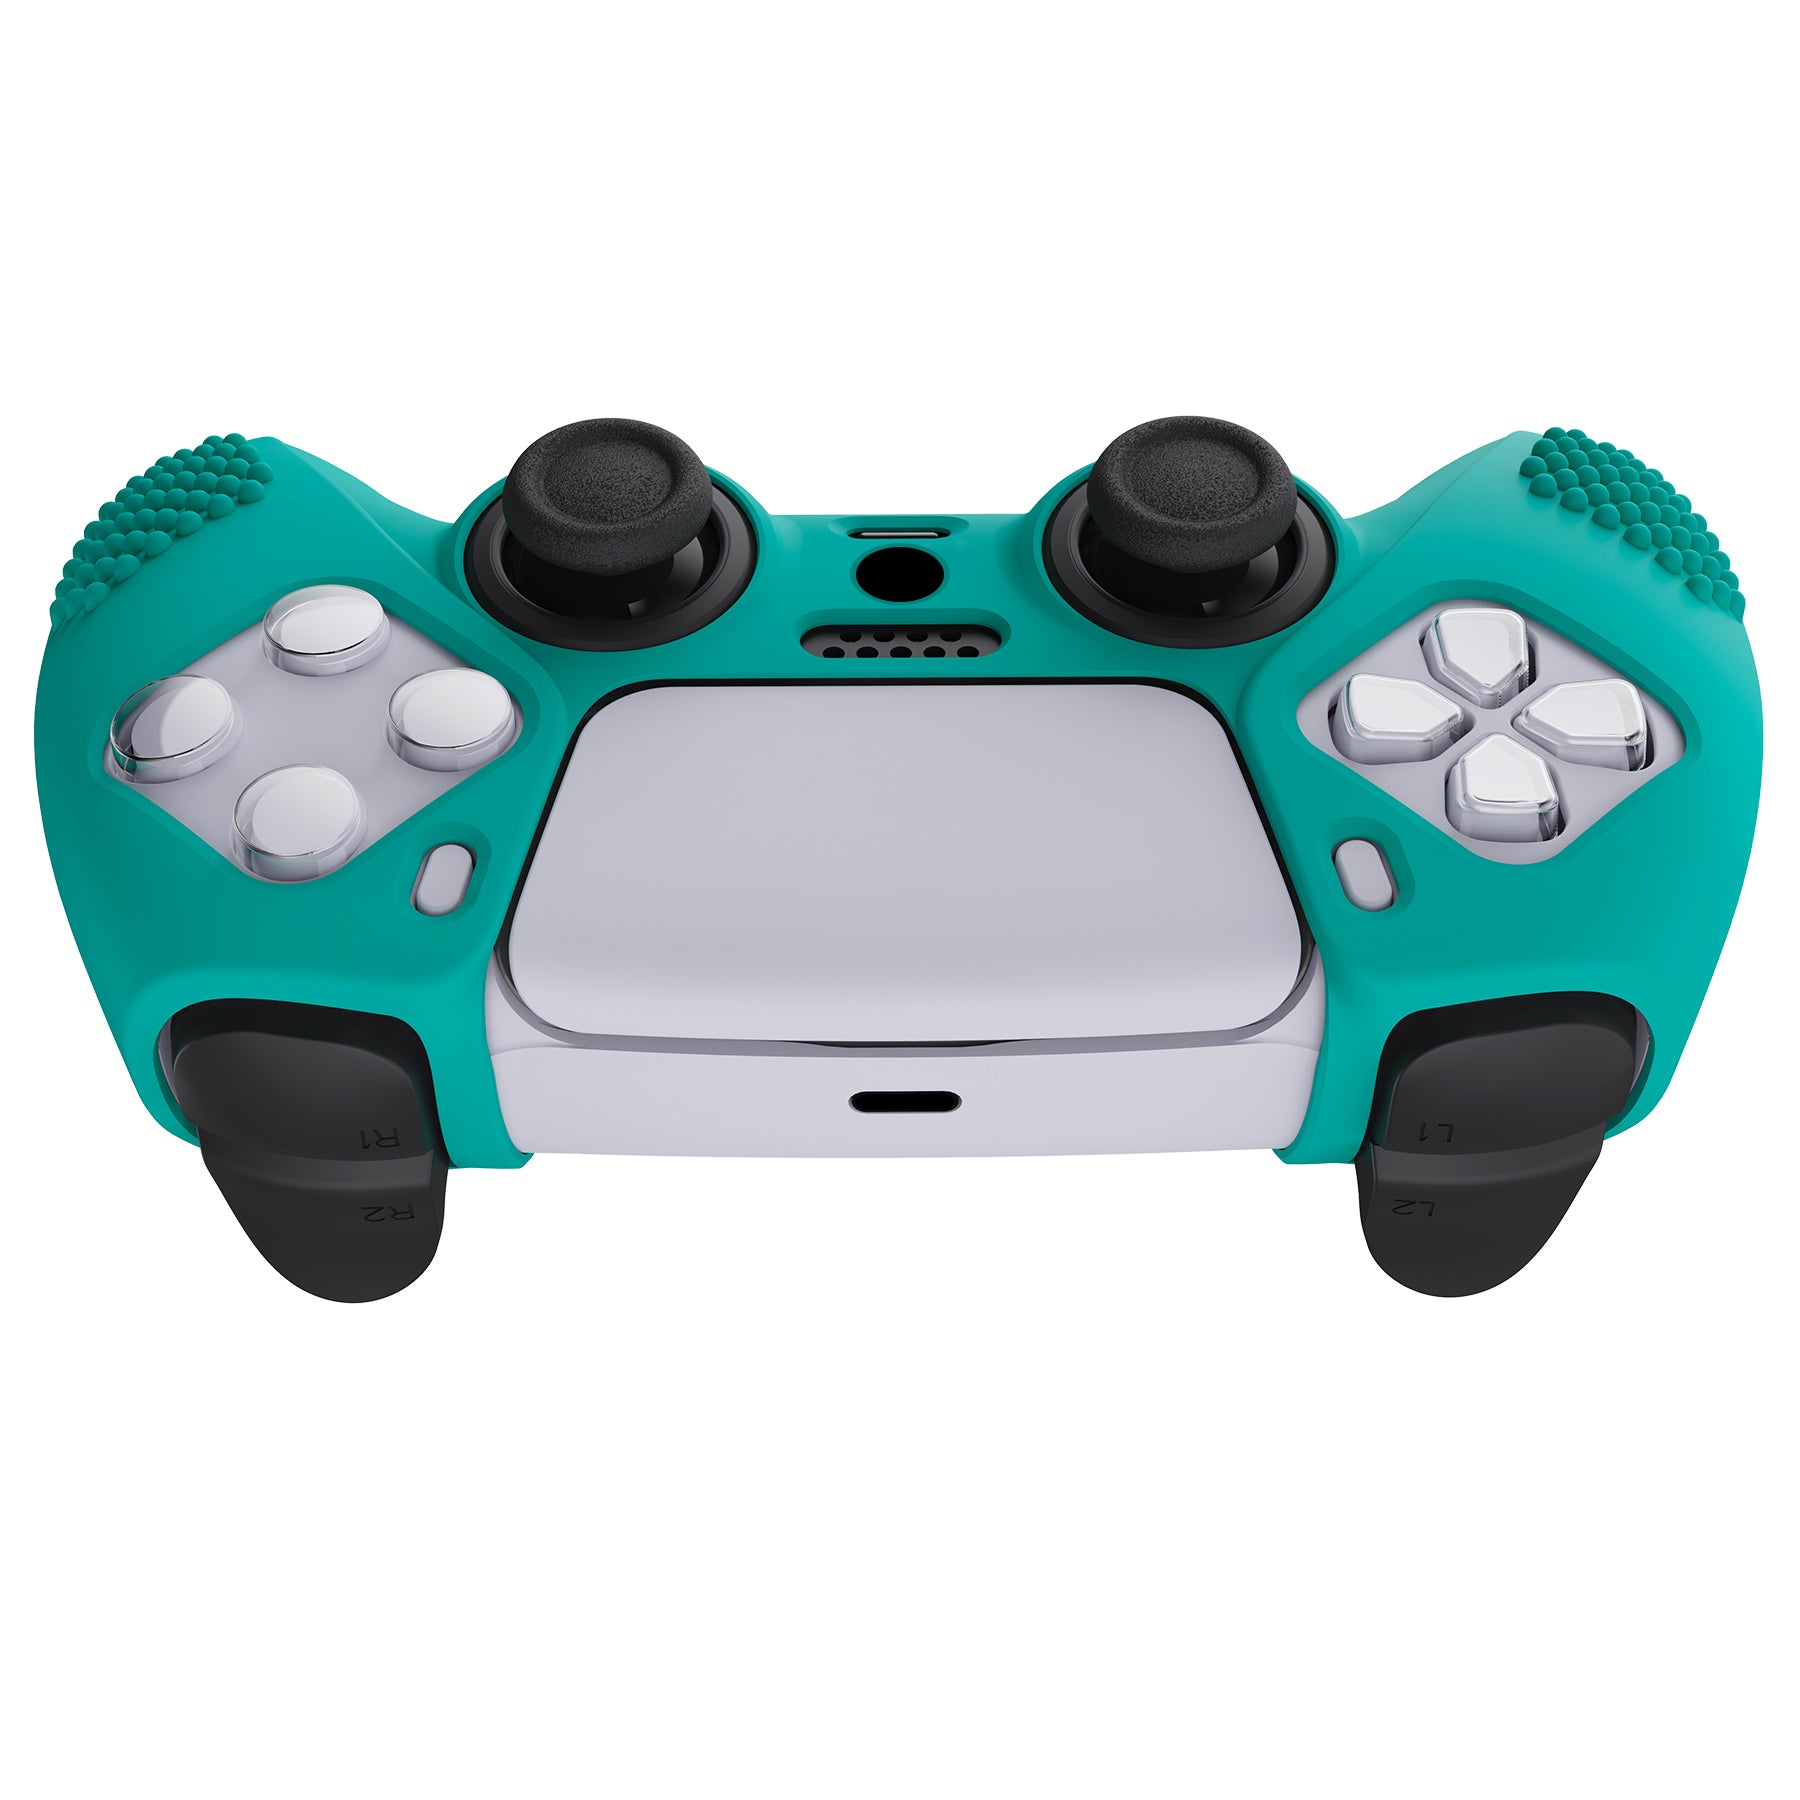 PlayVital 3D Studded Edition Anti-Slip Silicone Cover Skin with Thumb Grip Caps for PS5 Wireless Controller - Aqua Green - TDPF010 PlayVital